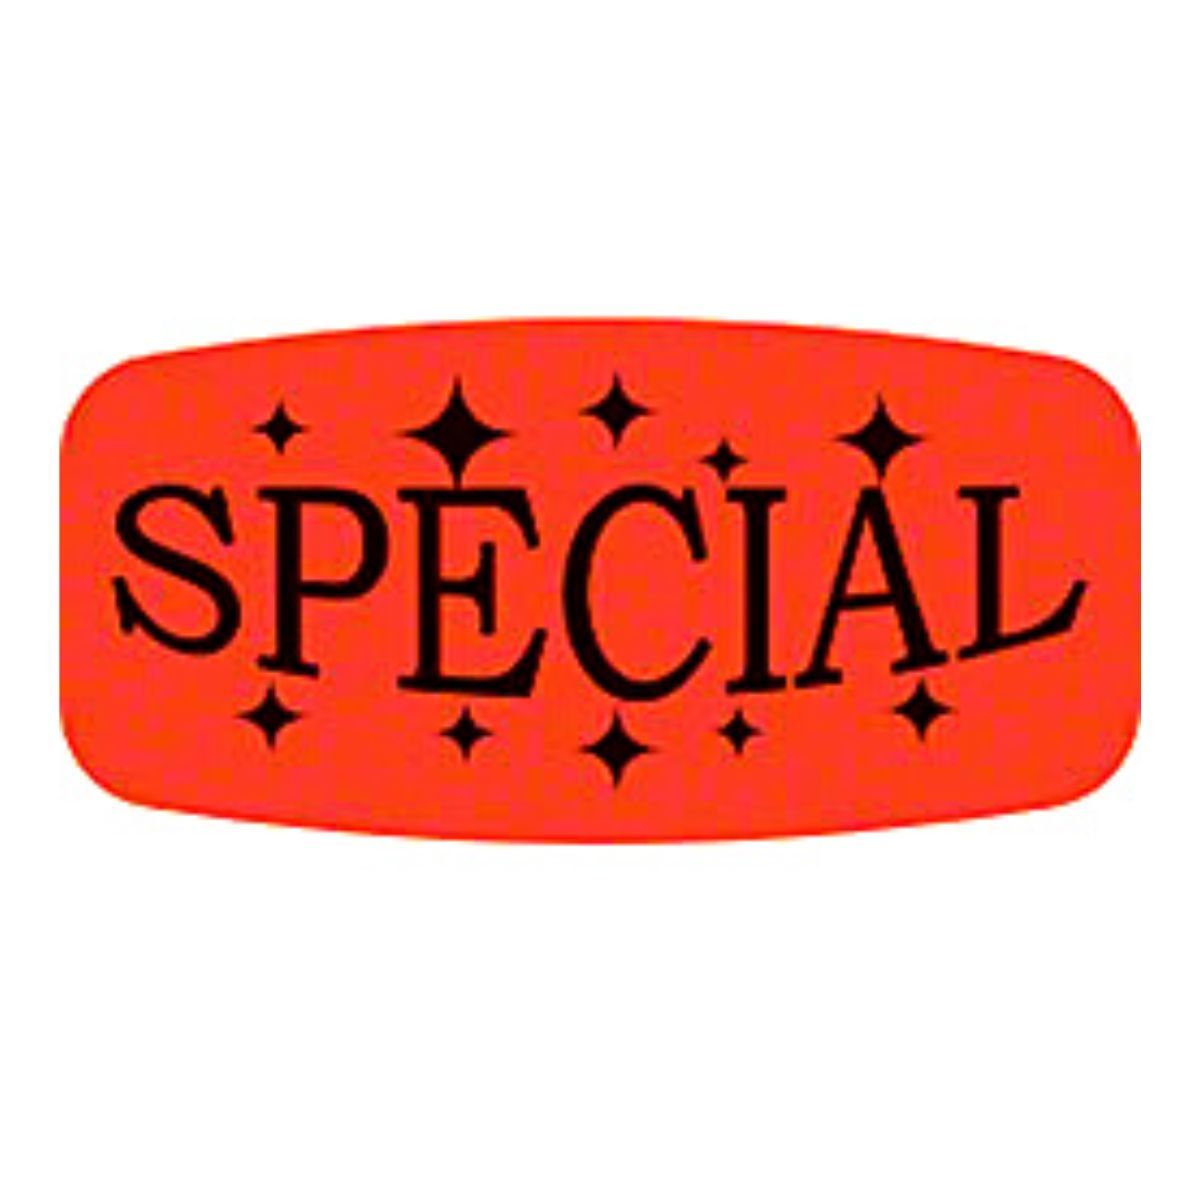 Bollin Label 12207 - Special (with Stars) Black On Red Short Oval - Roll of 1000